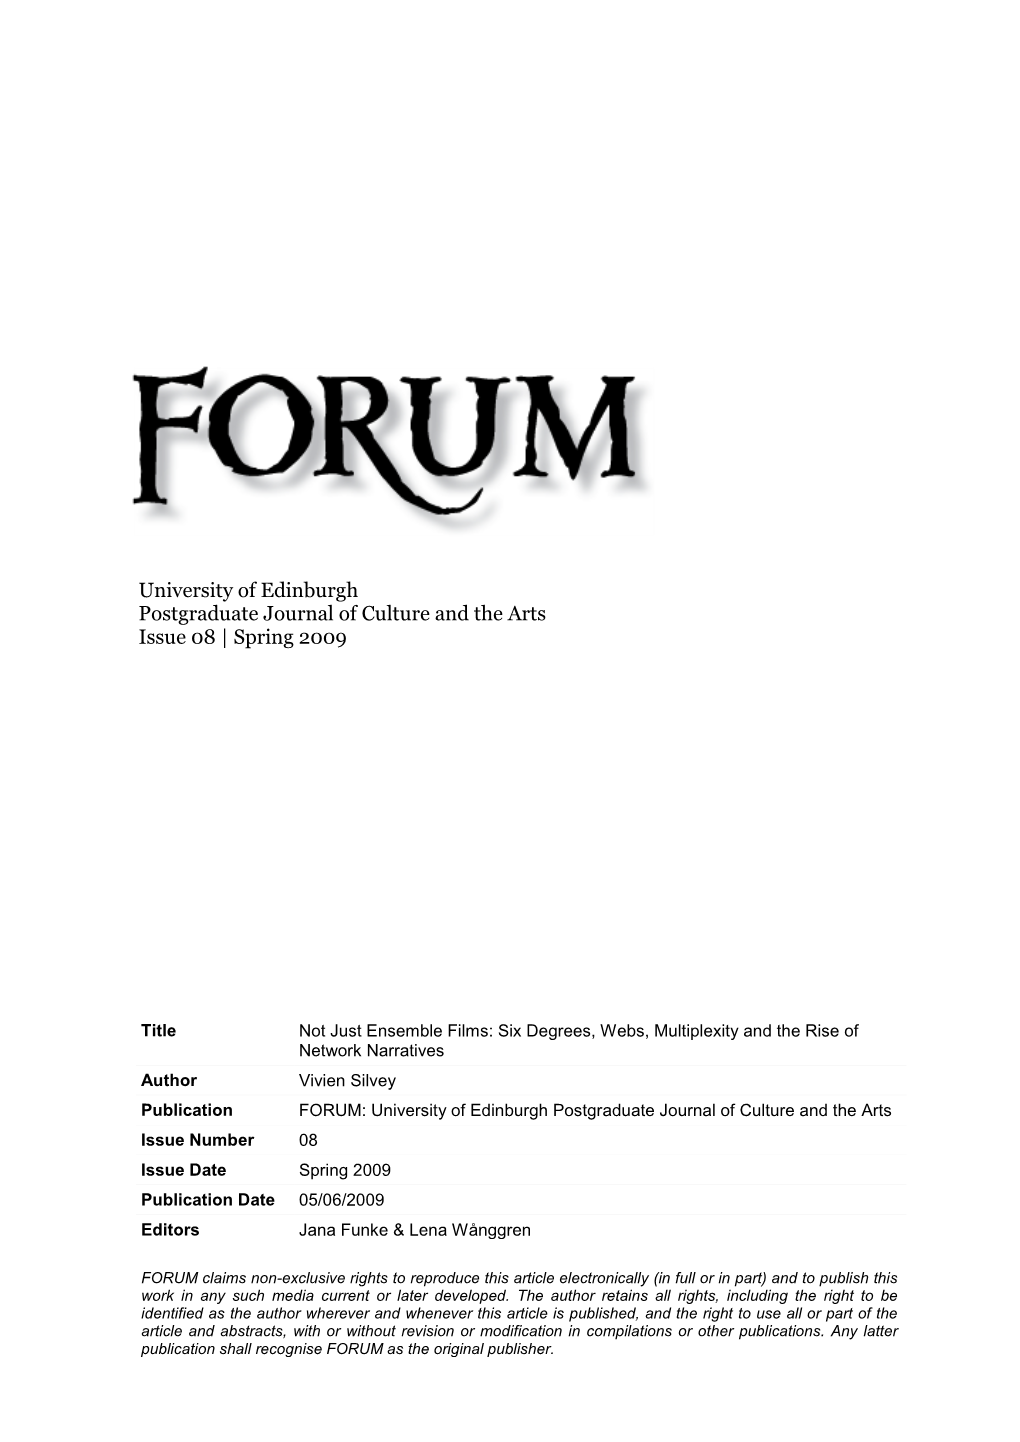 University of Edinburgh Postgraduate Journal of Culture and the Arts Issue 08 | Spring 2009